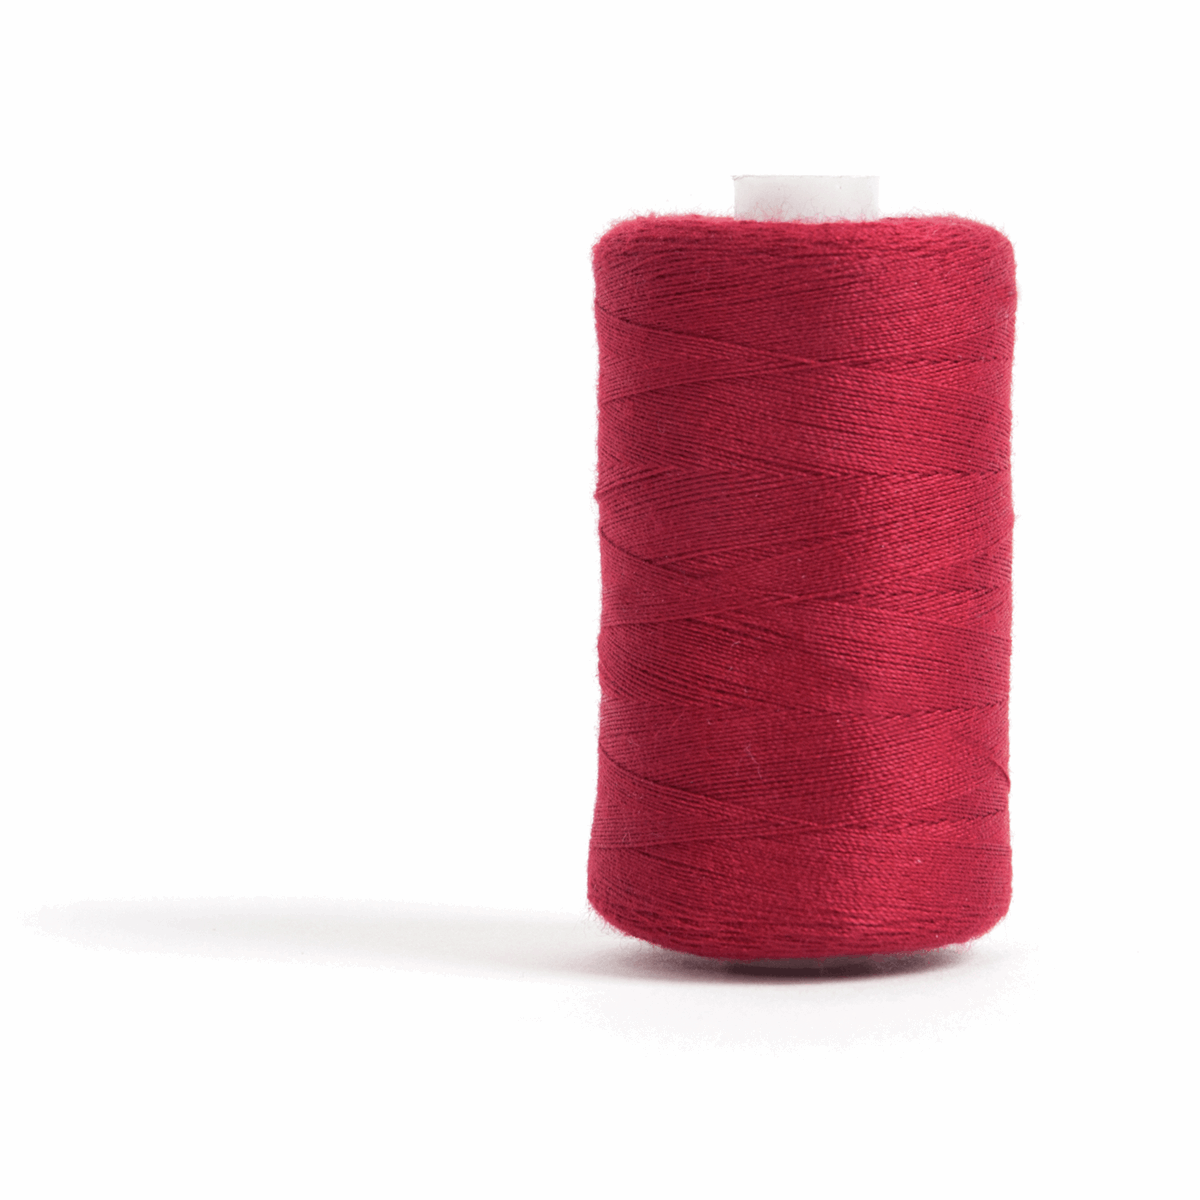 Thread 1000m Extra Large - Dark Red - for Sewing and Overlocking